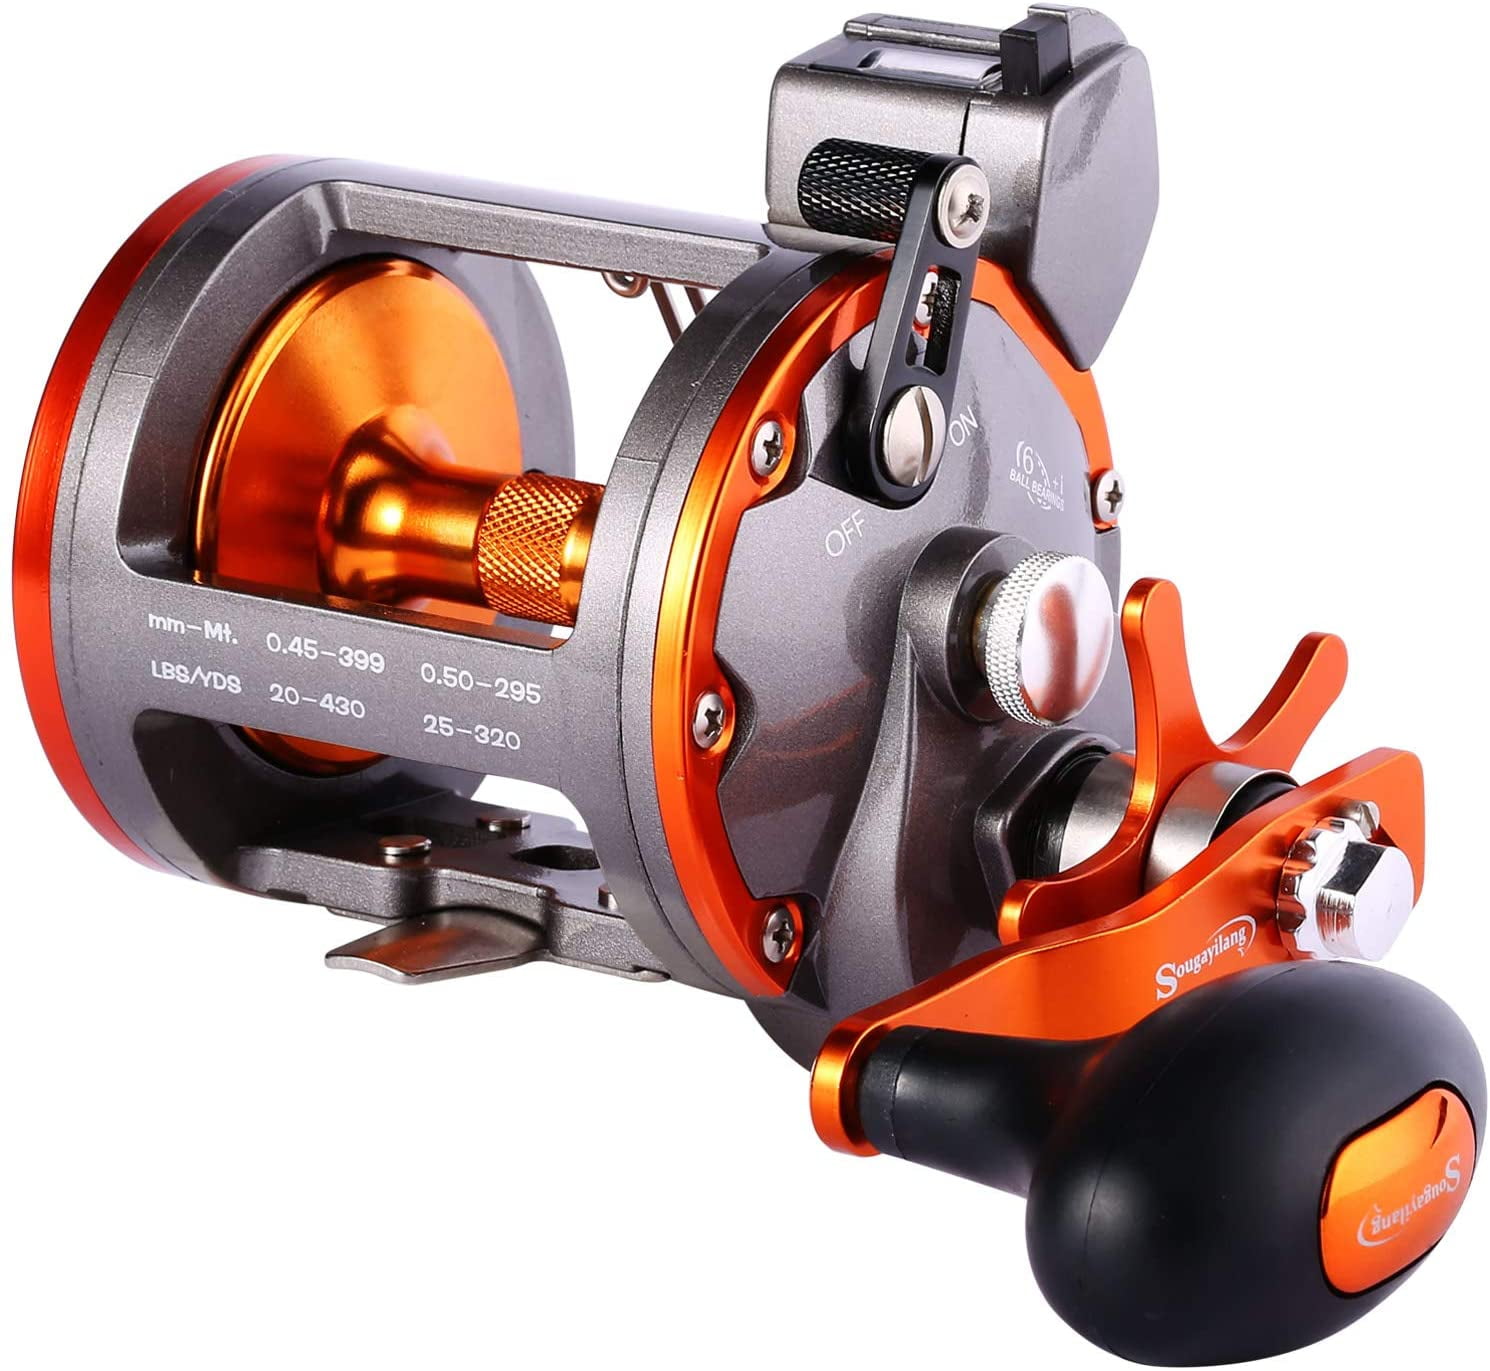 Summer and Centron Spinning Reels, 12 +1 BB Light Weight & Ultra Smooth  Reel for Ice/Summer 3000/1000 Fishing Reel by QINGLER